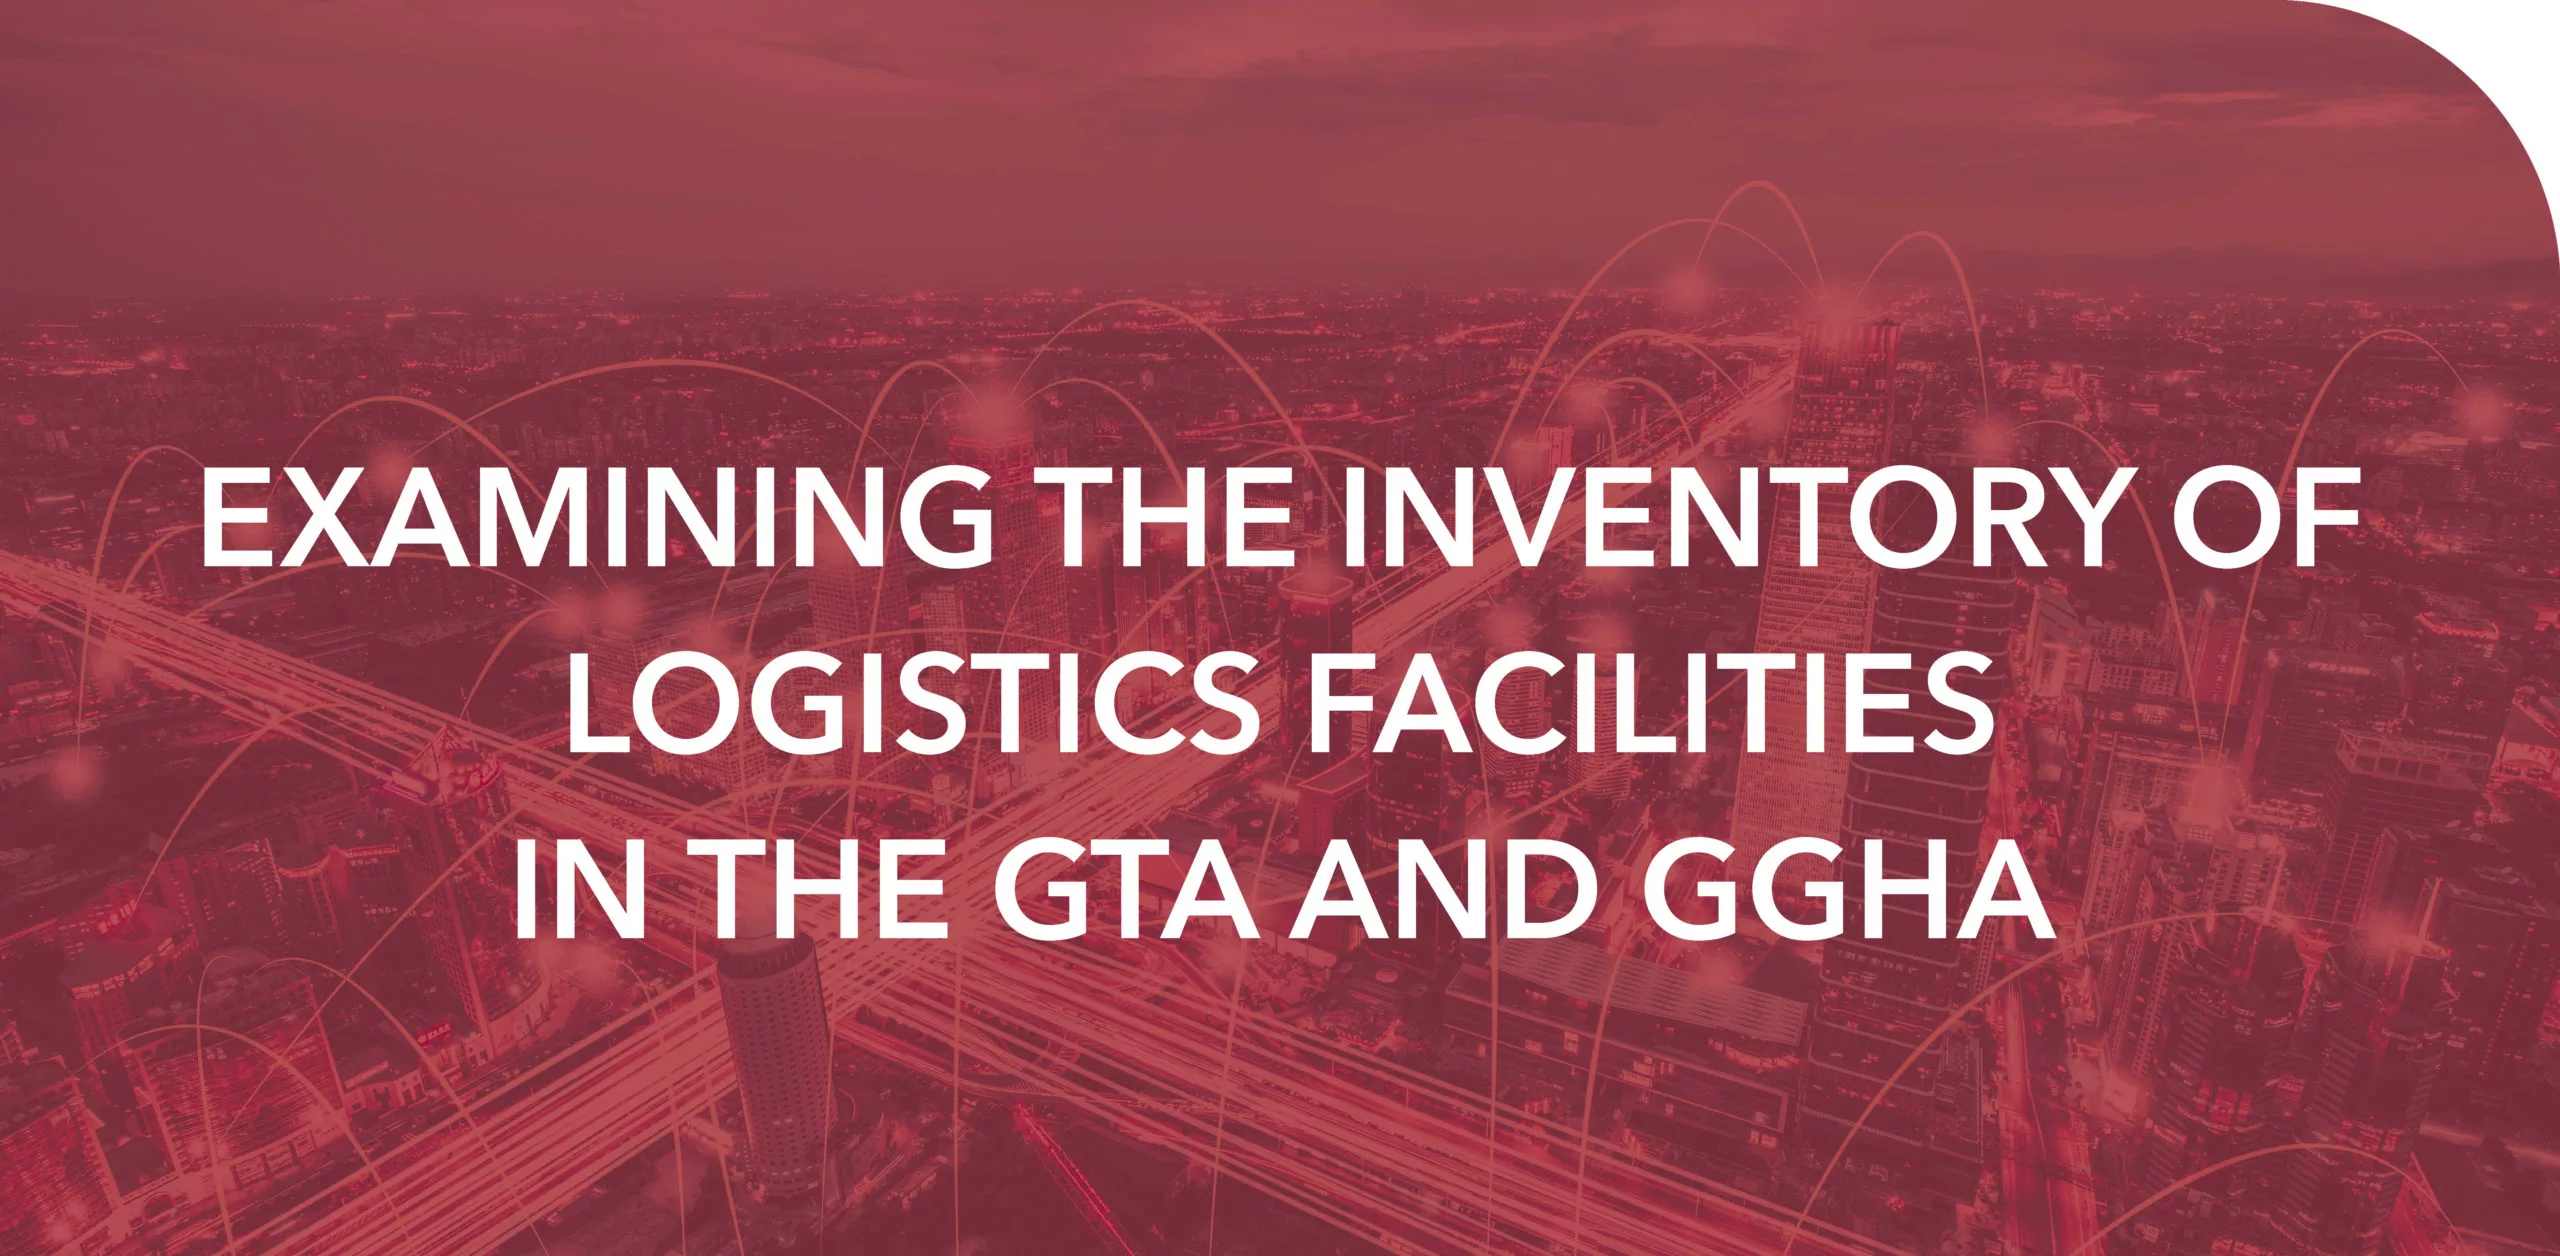 EXAMINING THE INVENTORY OF LOGISTICS FACILITIES IN THE GTA AND GGHA